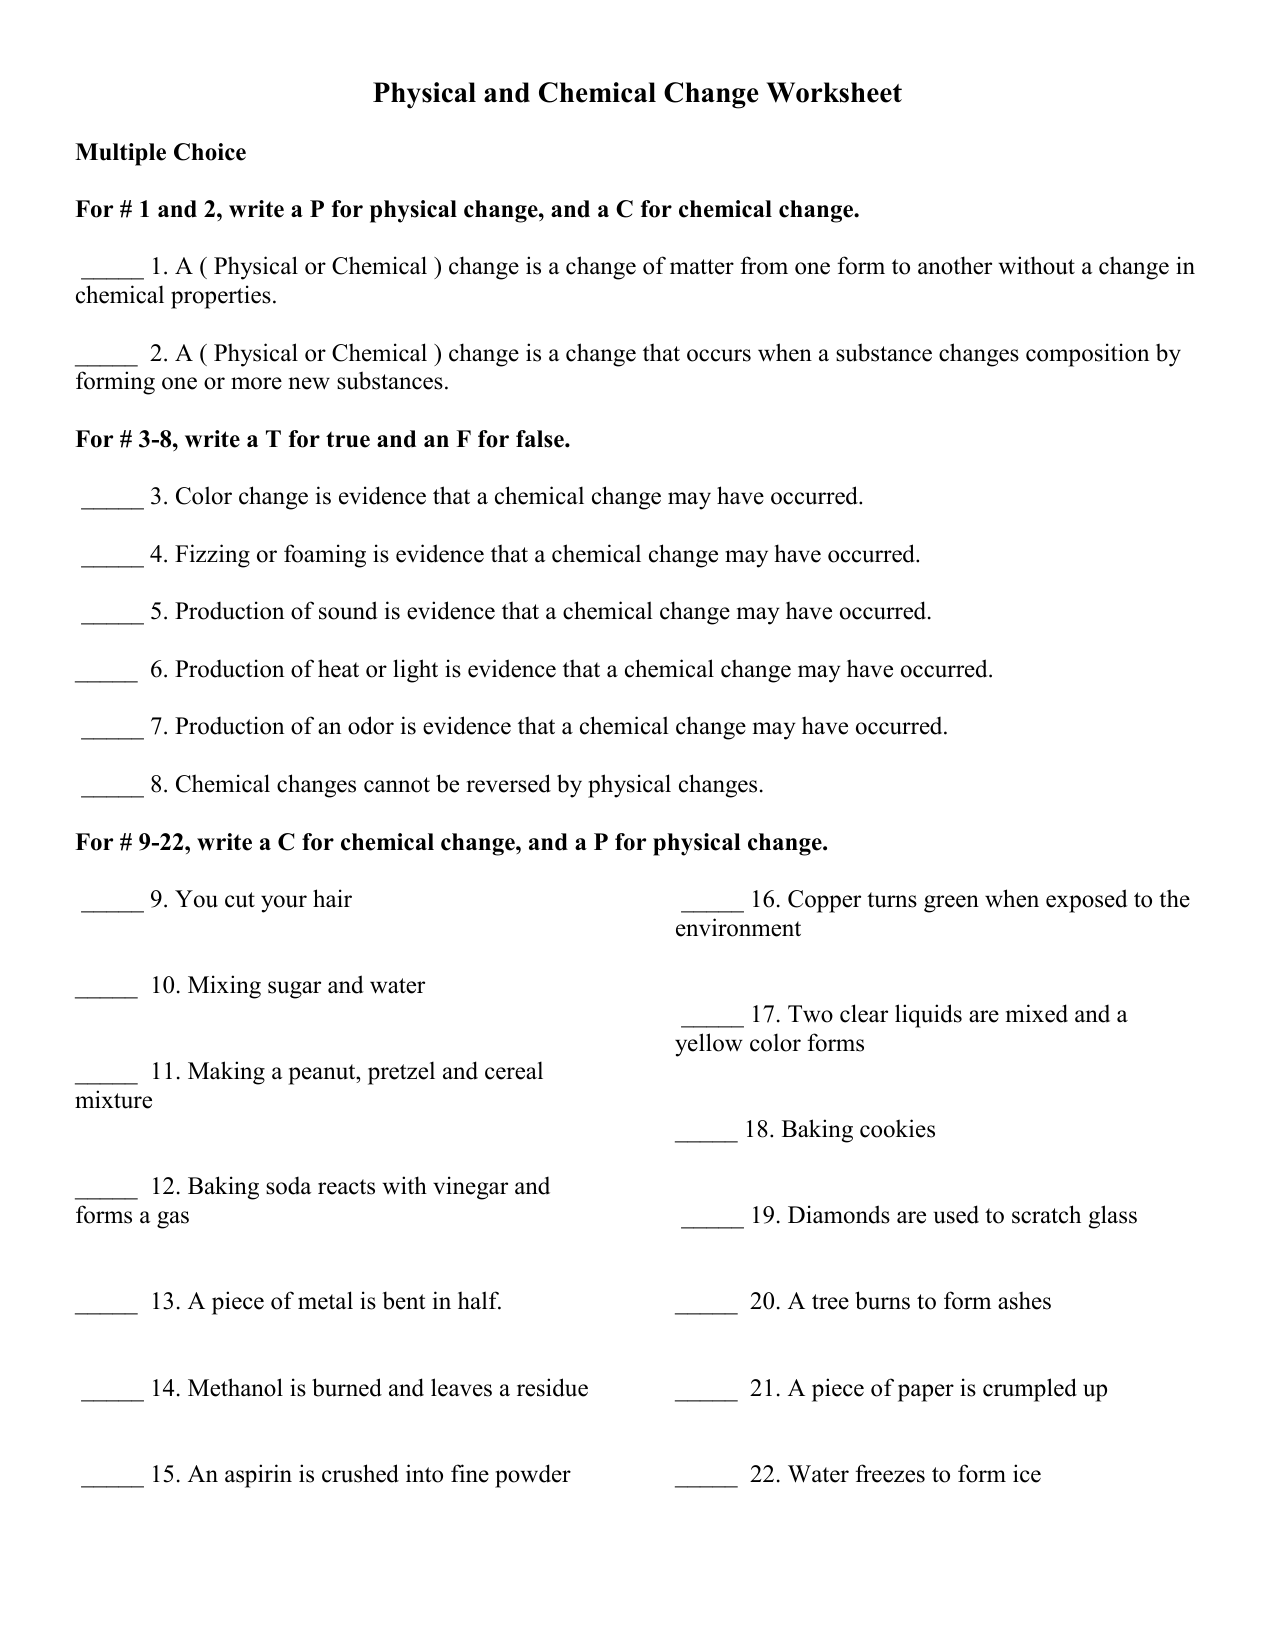 Physical and Chemical Change Worksheet for HW CP Pertaining To Physical And Chemical Change Worksheet